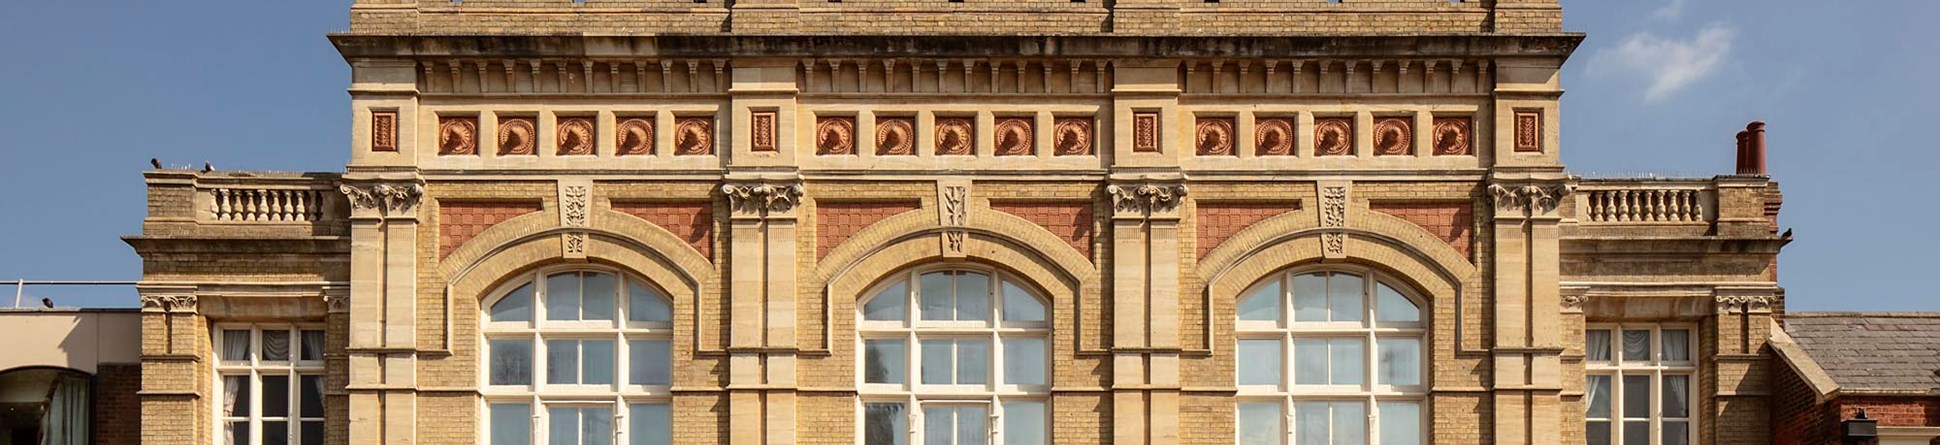 Bedford Corn Exchange is a five-bay, two-storey building. The roof has a slate covering and the walls are constructed of white brick with Bath stone cornices and pennant stone dressings.


